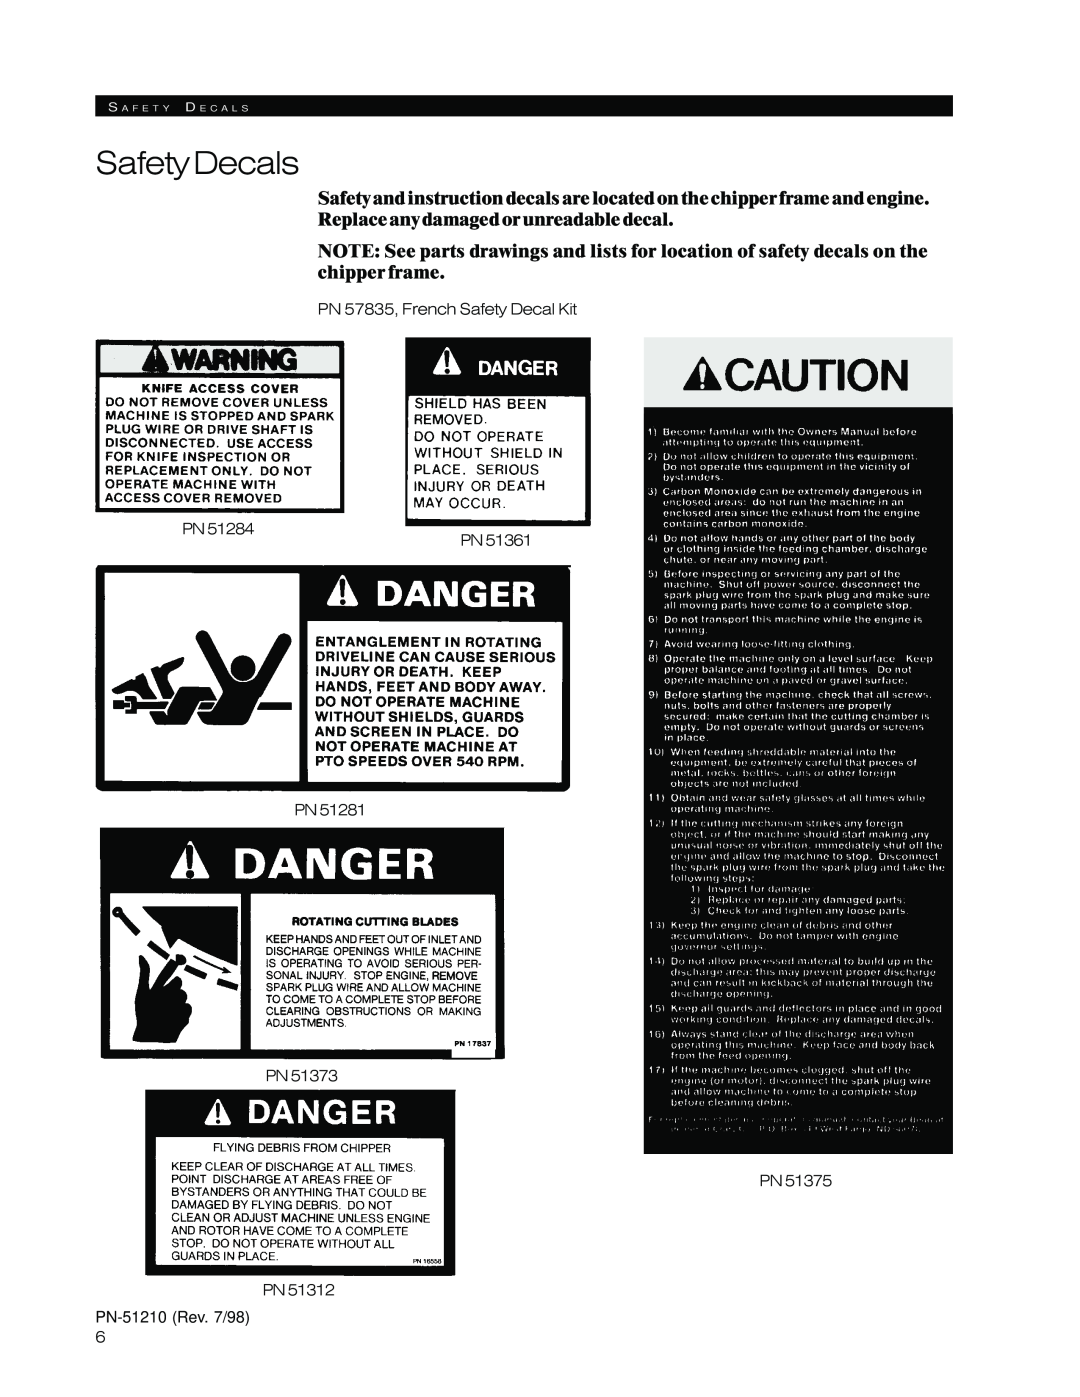 Woods Equipment 8000, 8100 manual SafetyDecals 